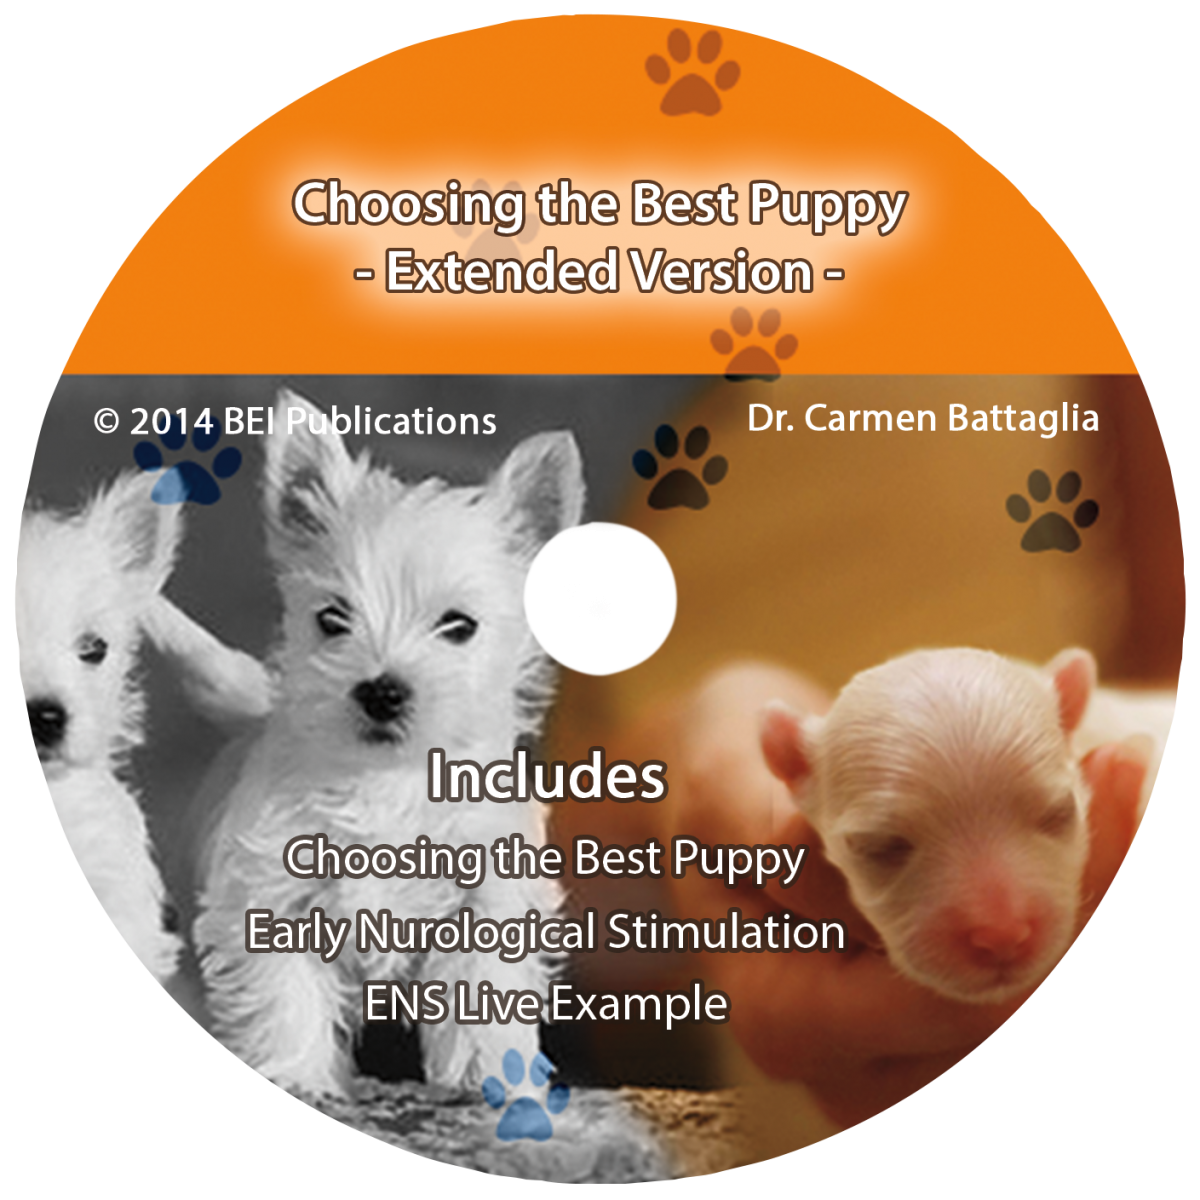 Choosing the Best Puppy DVD Cover